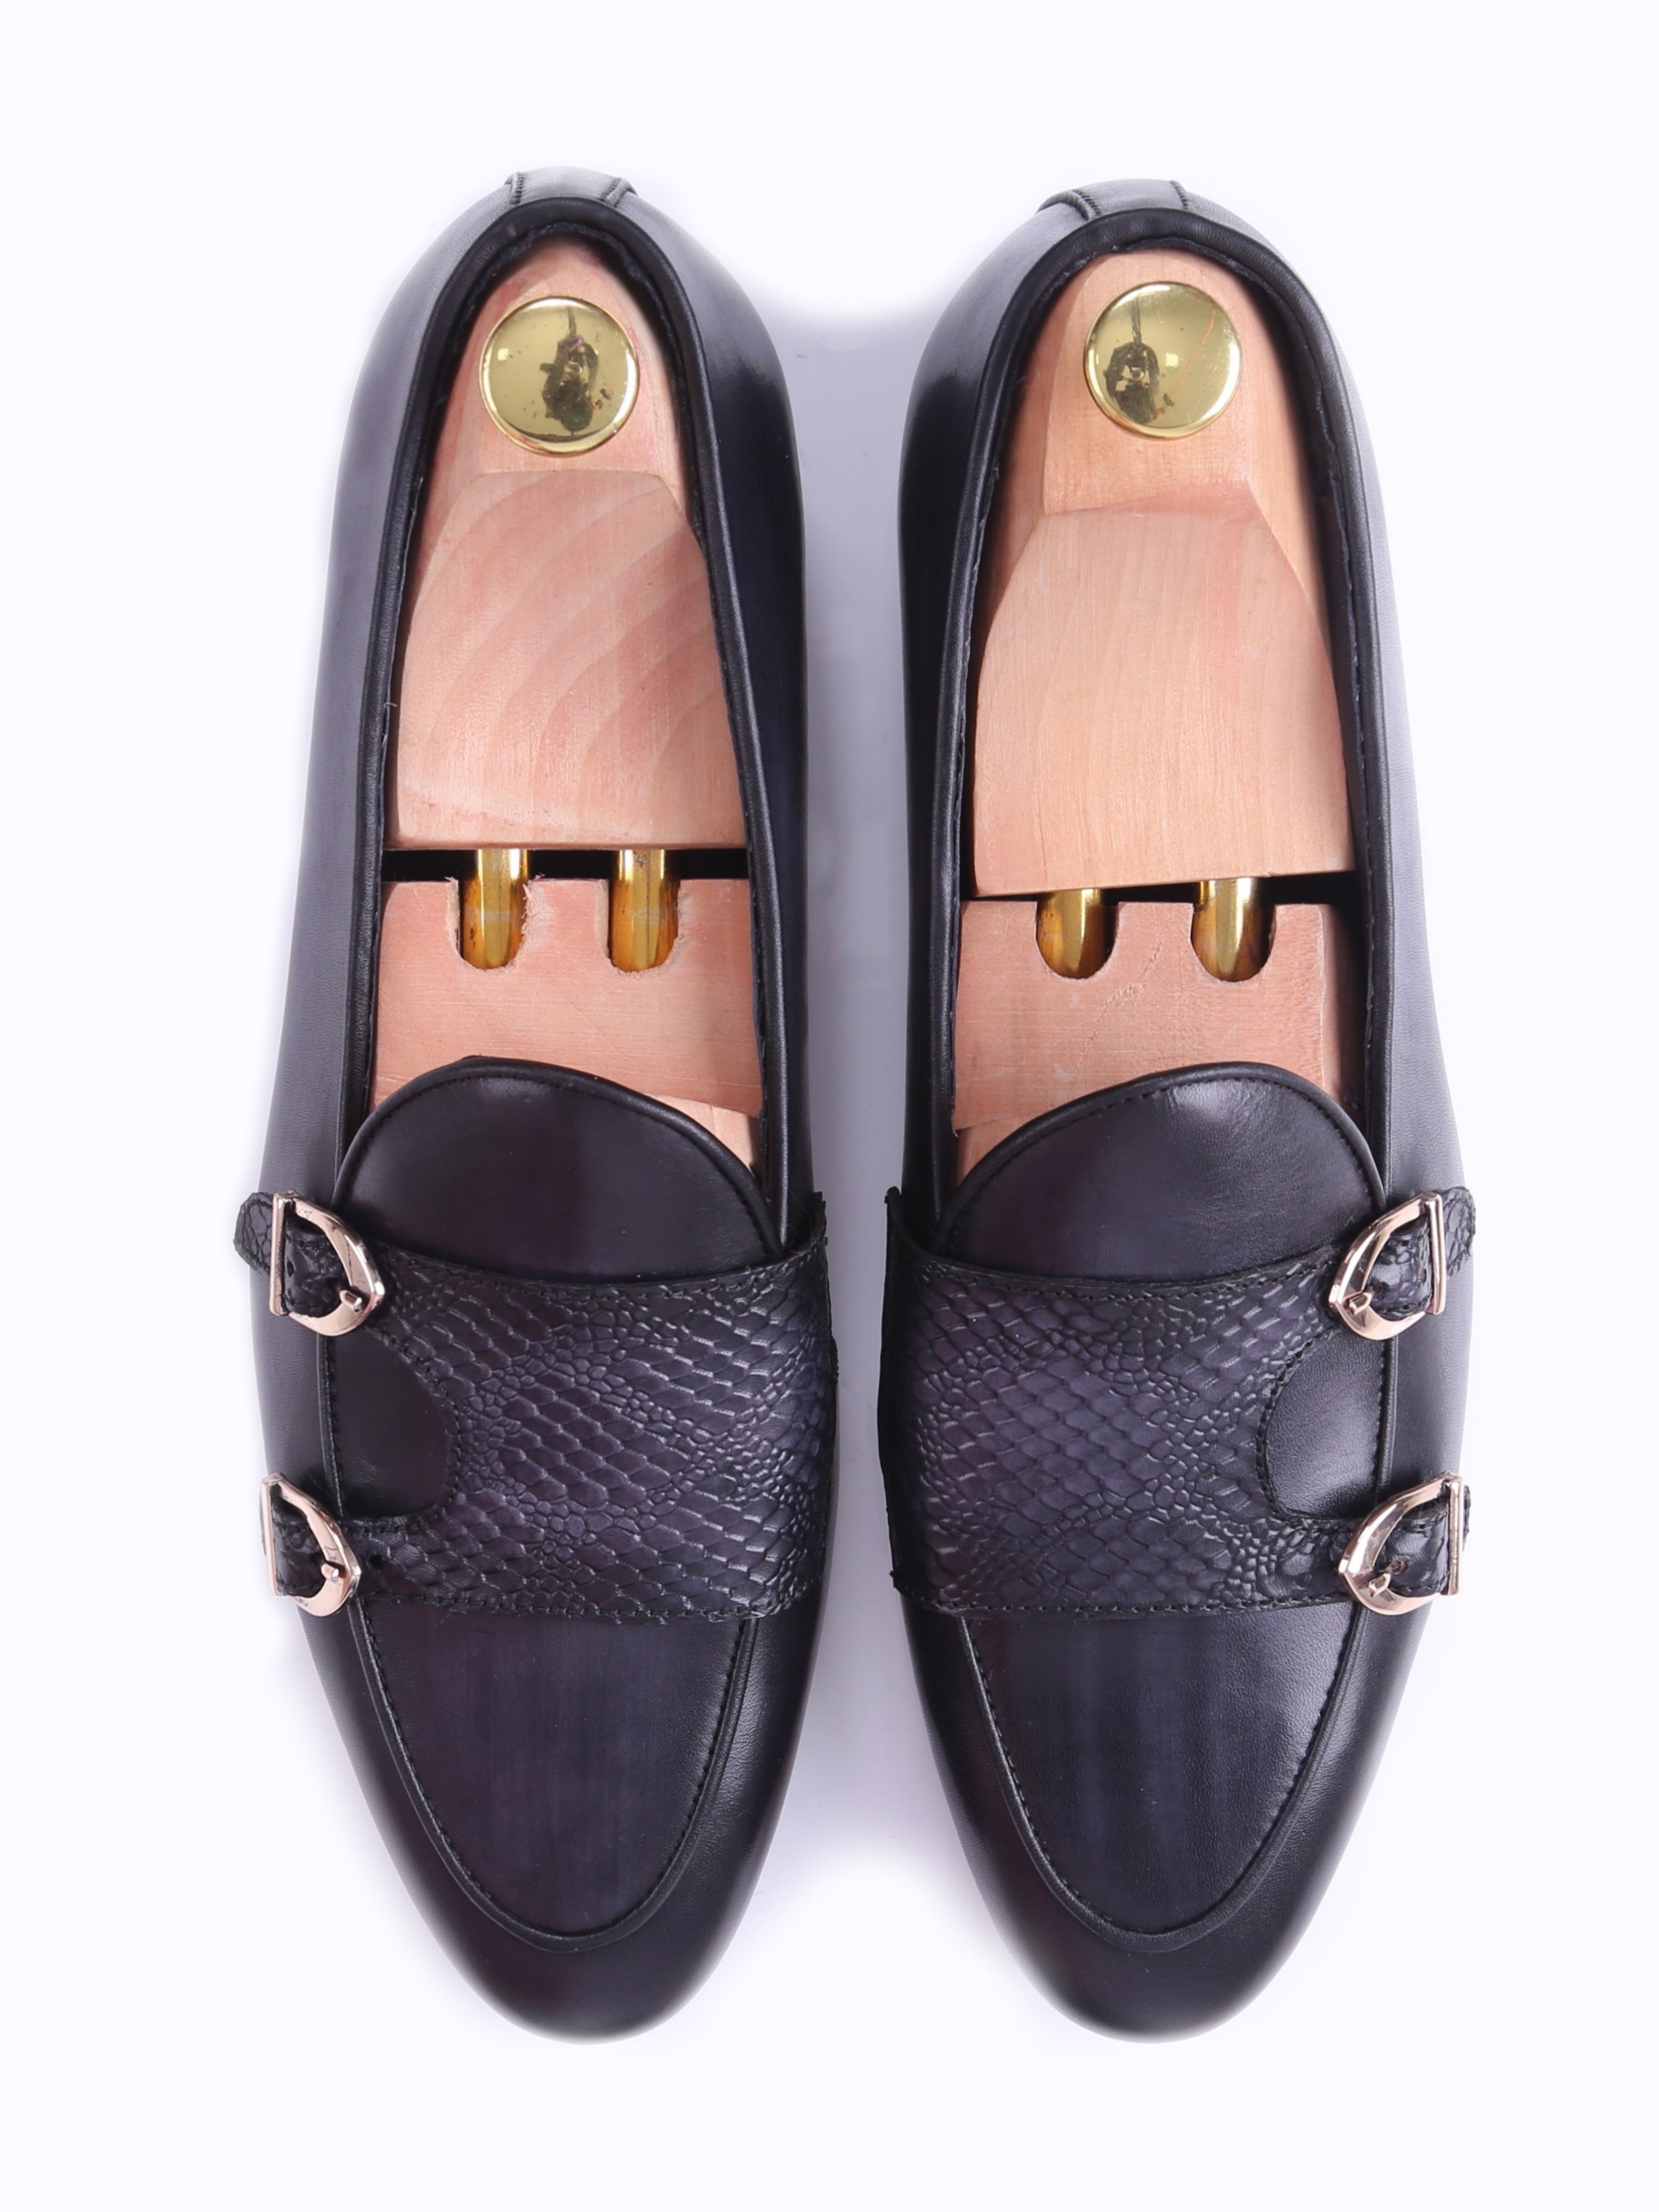 Belgian Loafer - Black Grey Snake Skin Double Monk Strap (Hand Painted Patina) - Zeve Shoes